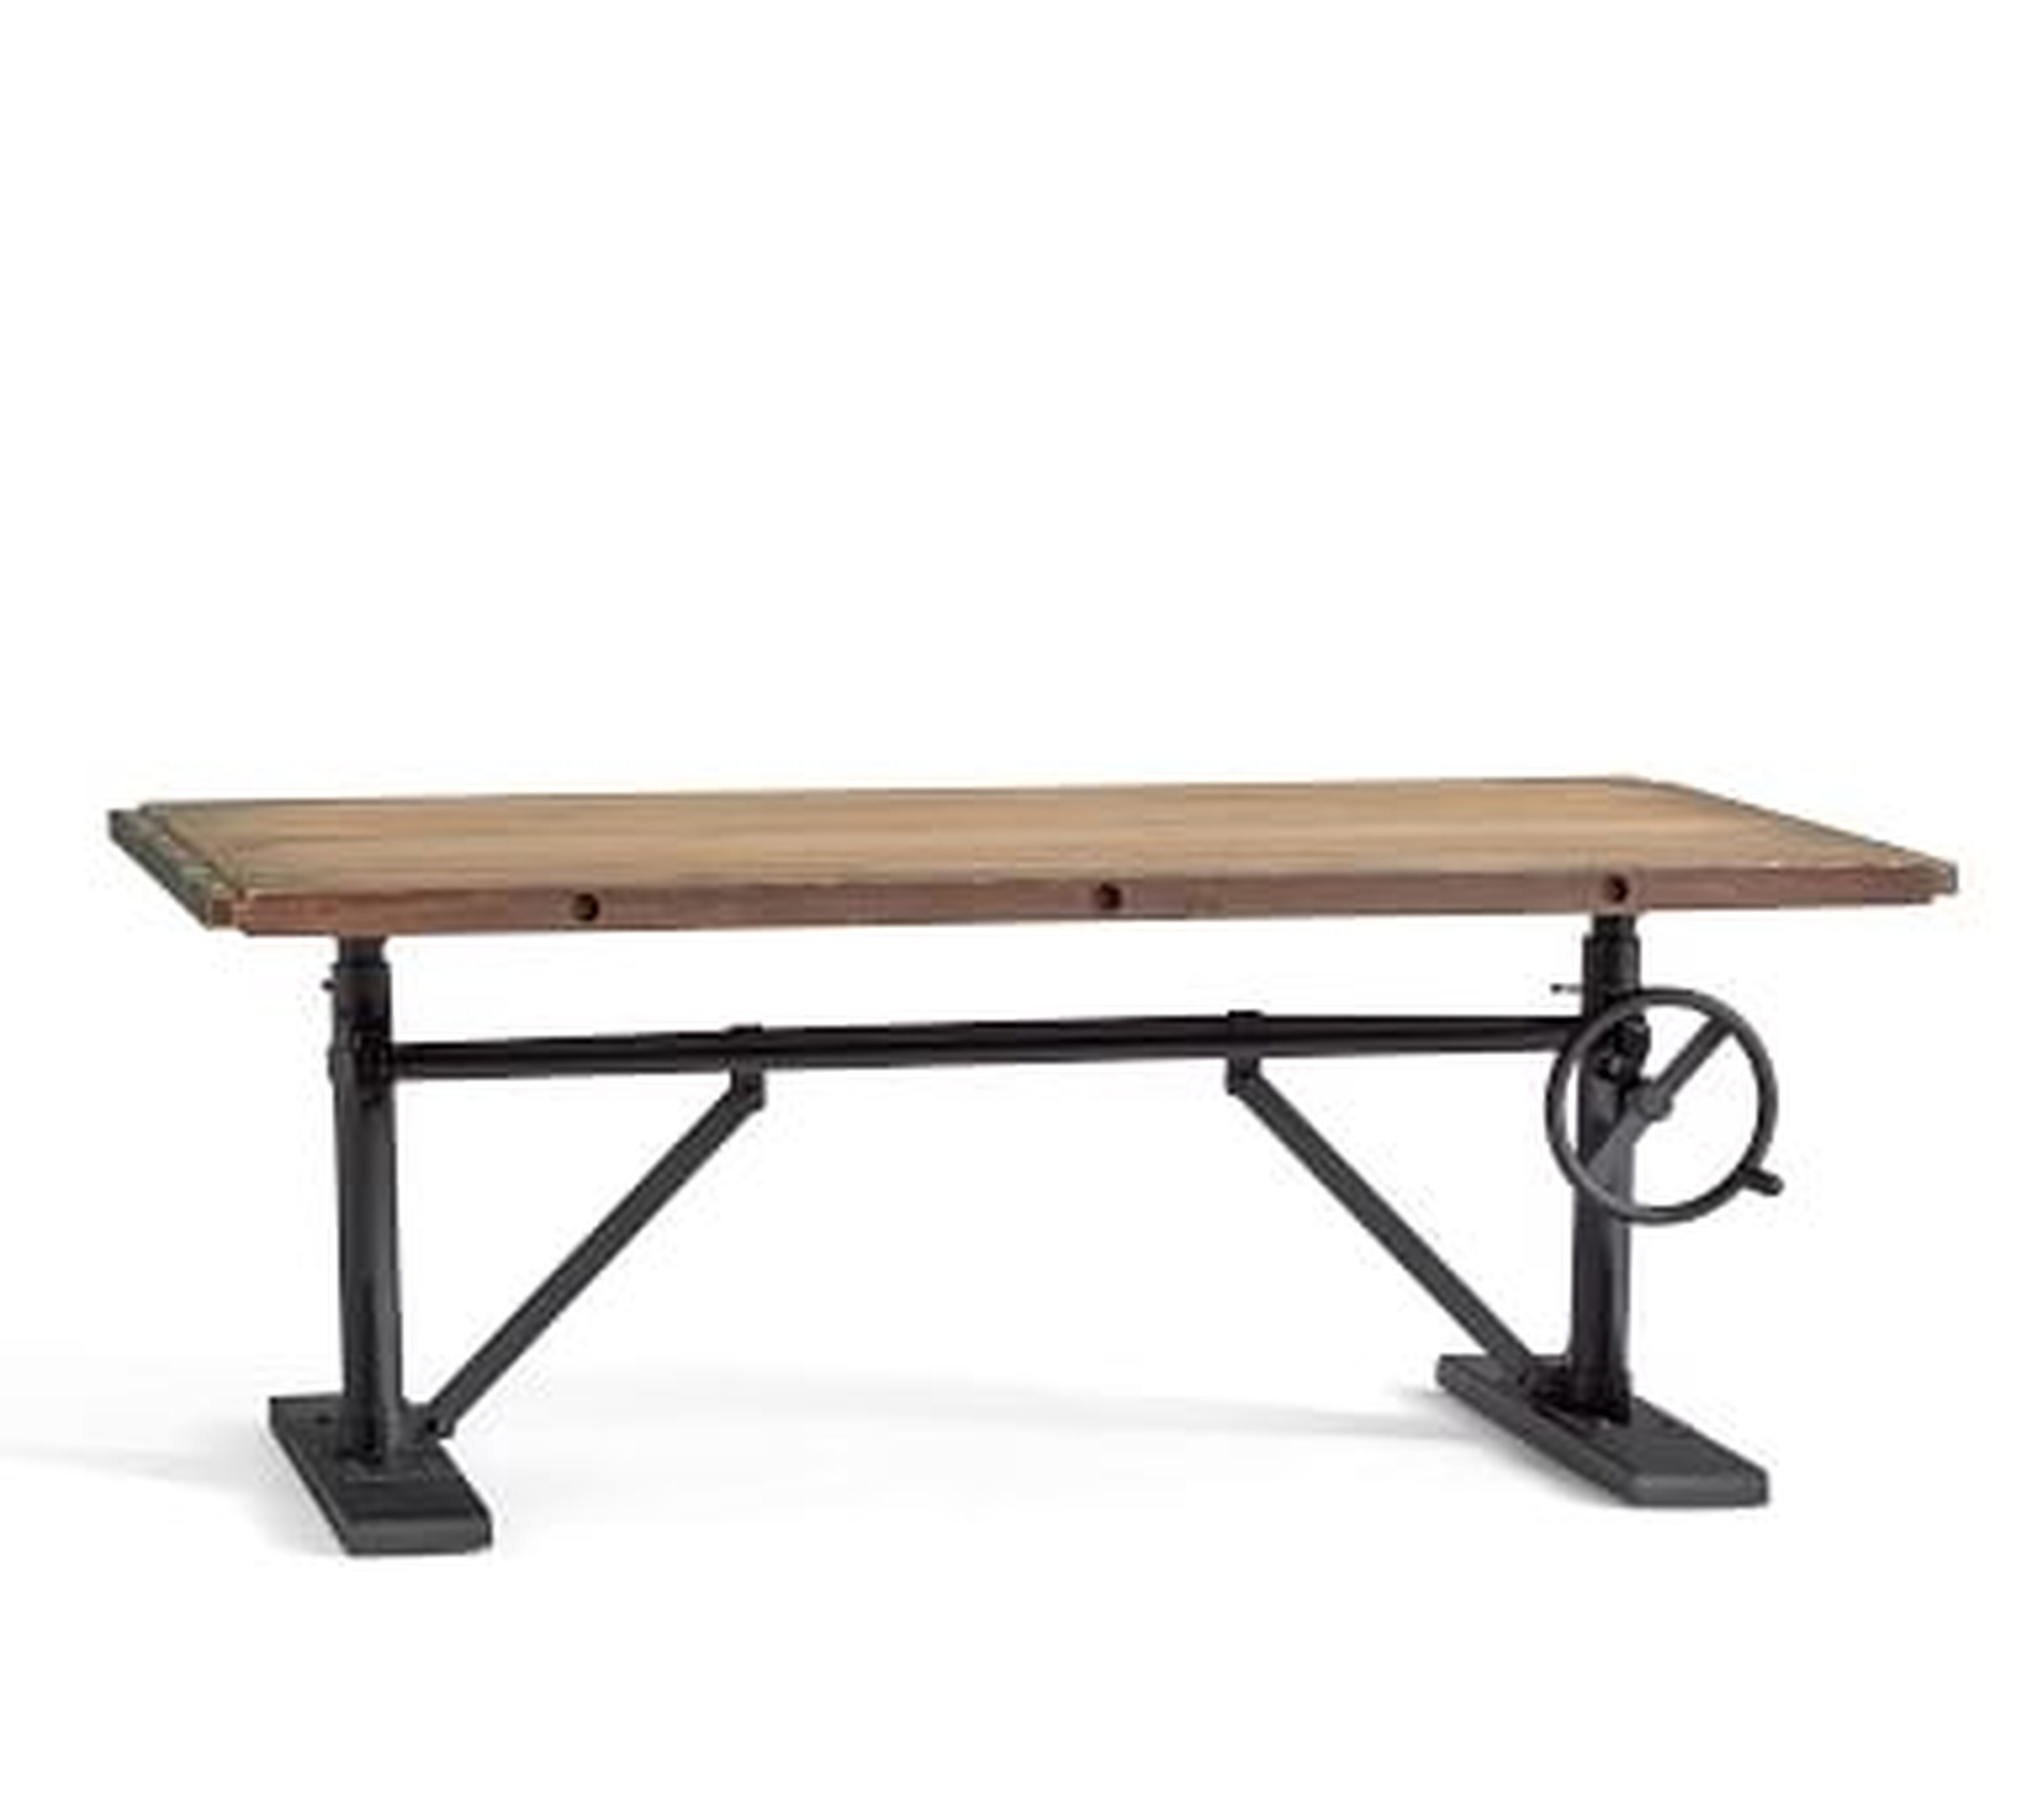 Pittsburgh Crank Coffee Table, Washed Pine, 48"L - Pottery Barn